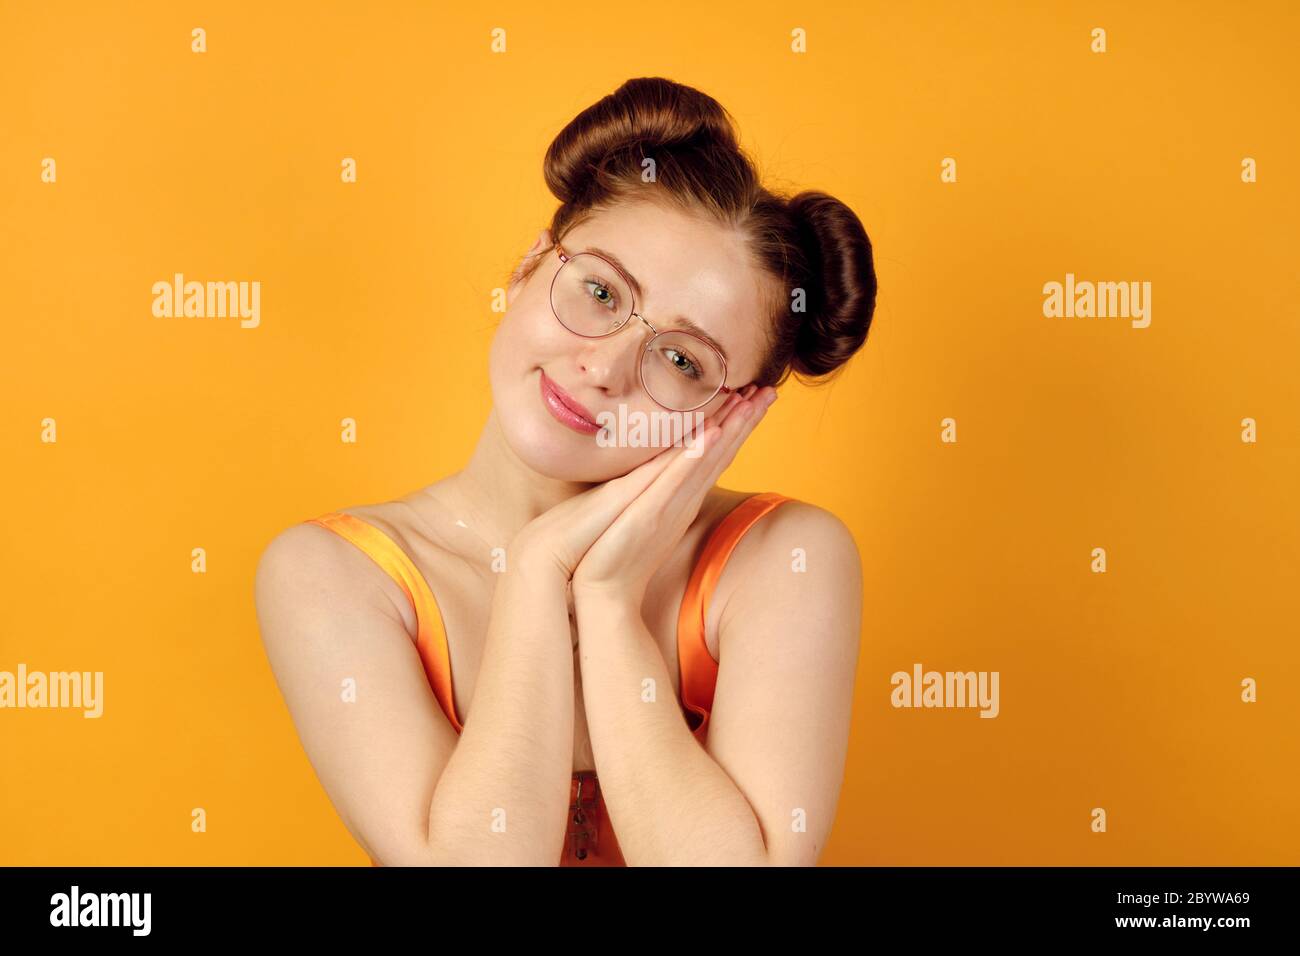 Red-haired girl in round glasses and an orange top stands on a yellow background, resting her head on folded palms. Stock Photo